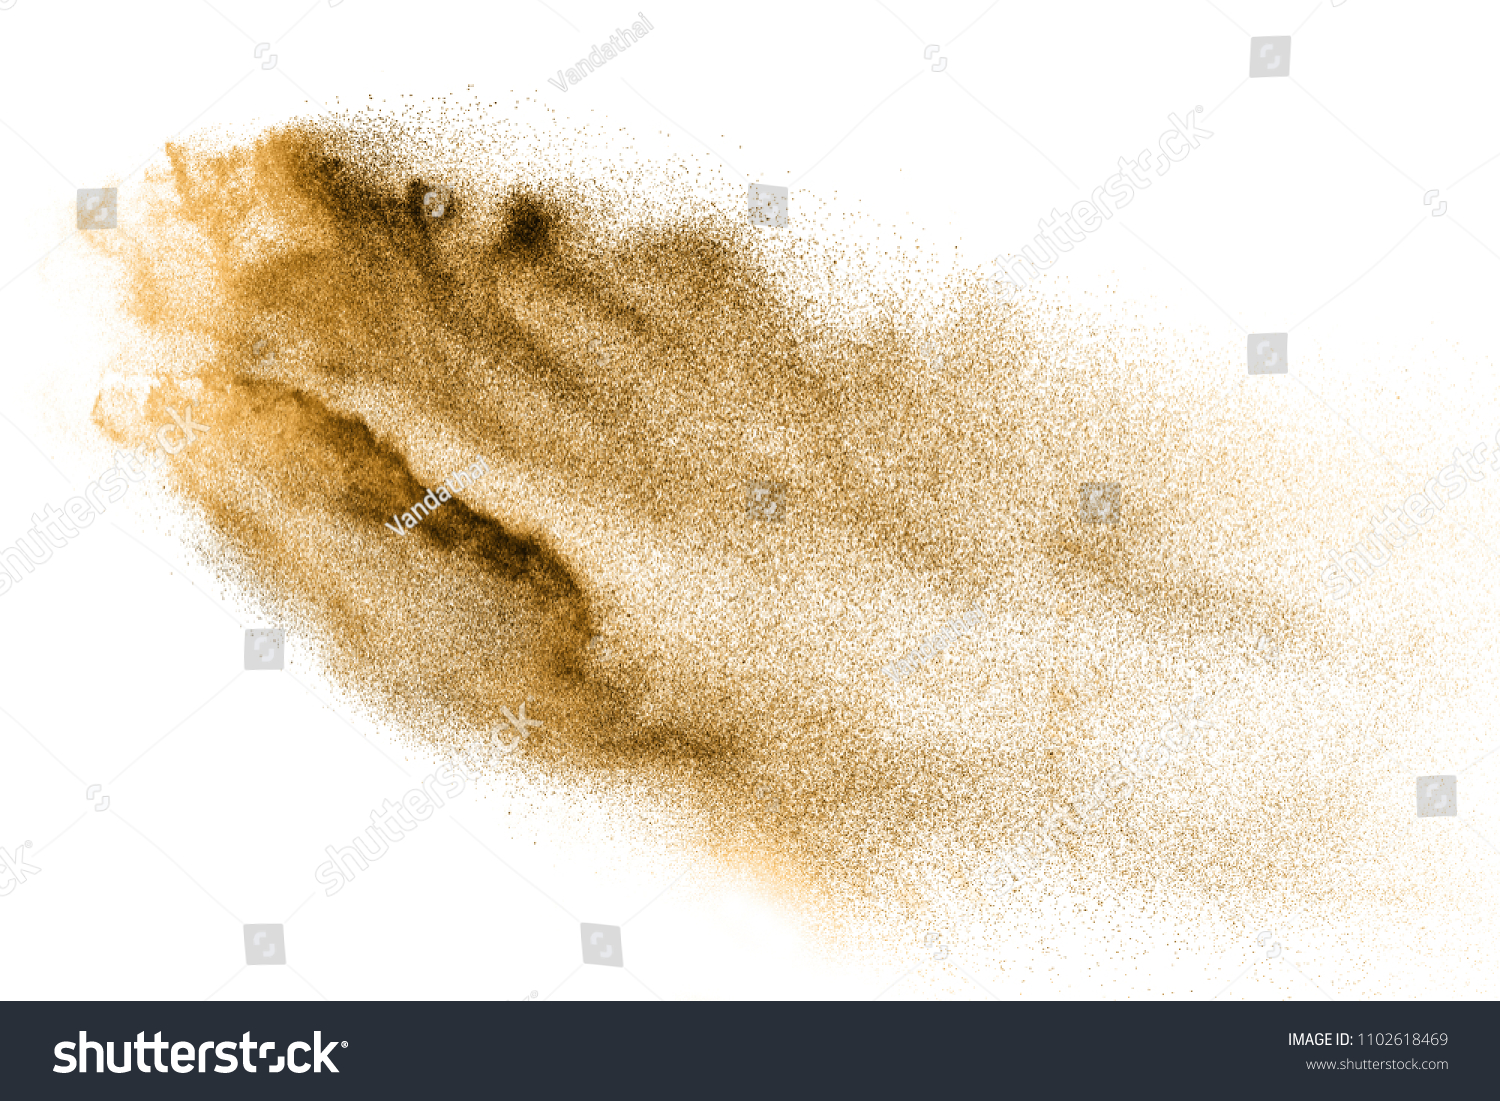 Golden sand explosion isolated on white background. Abstract sand cloud. Gold sand splash against on clear background. Sandy fly wave in the air. #1102618469